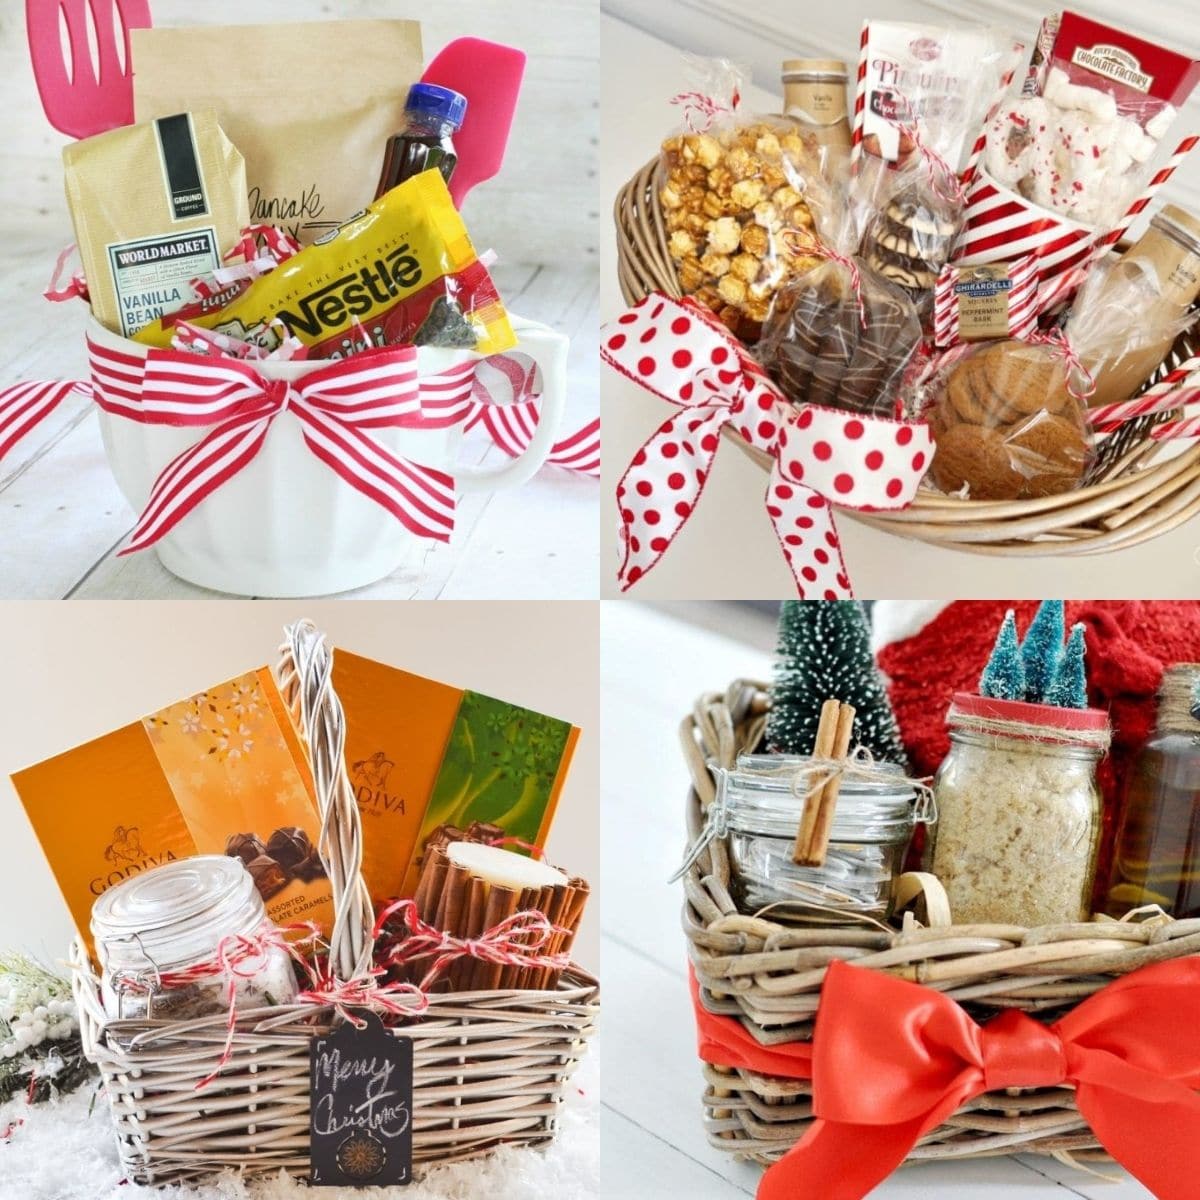 Dutch gifts, hampers and collections – Big Bite Dutch Treats